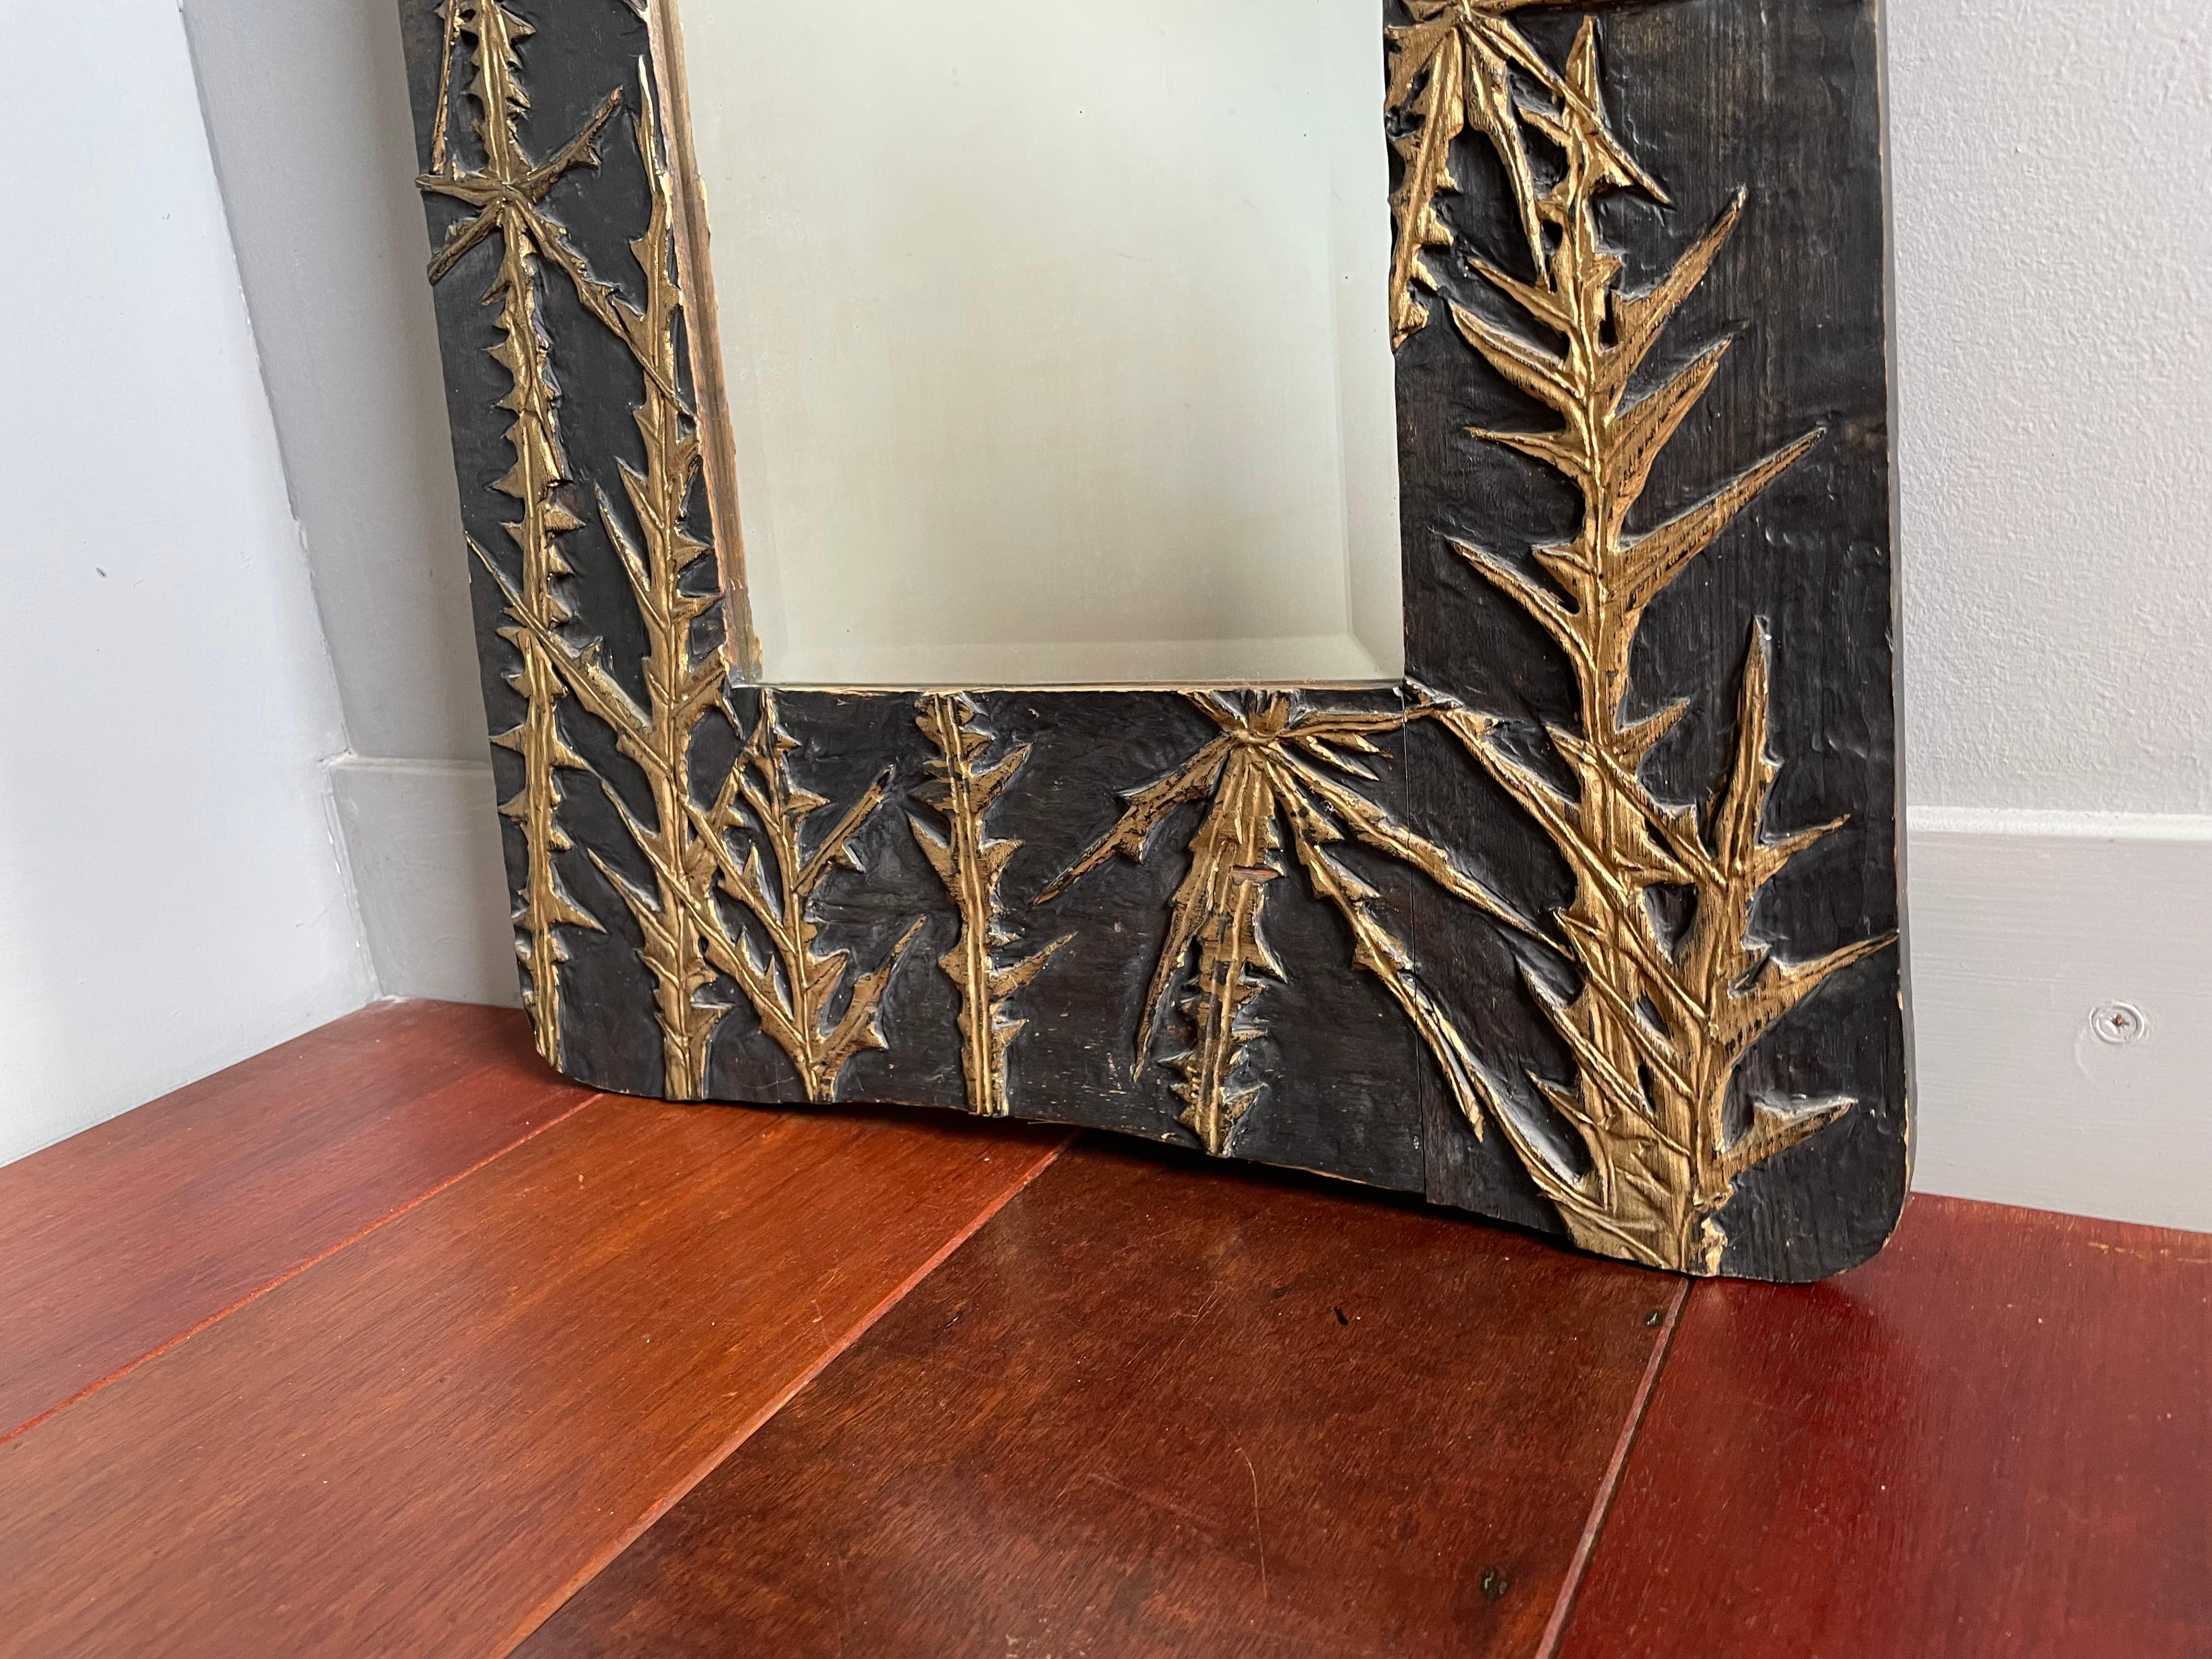 Arts and Crafts Hand Carved Arts & Crafts Style Wall Mirror with Gold Painted Thistle Sculptures